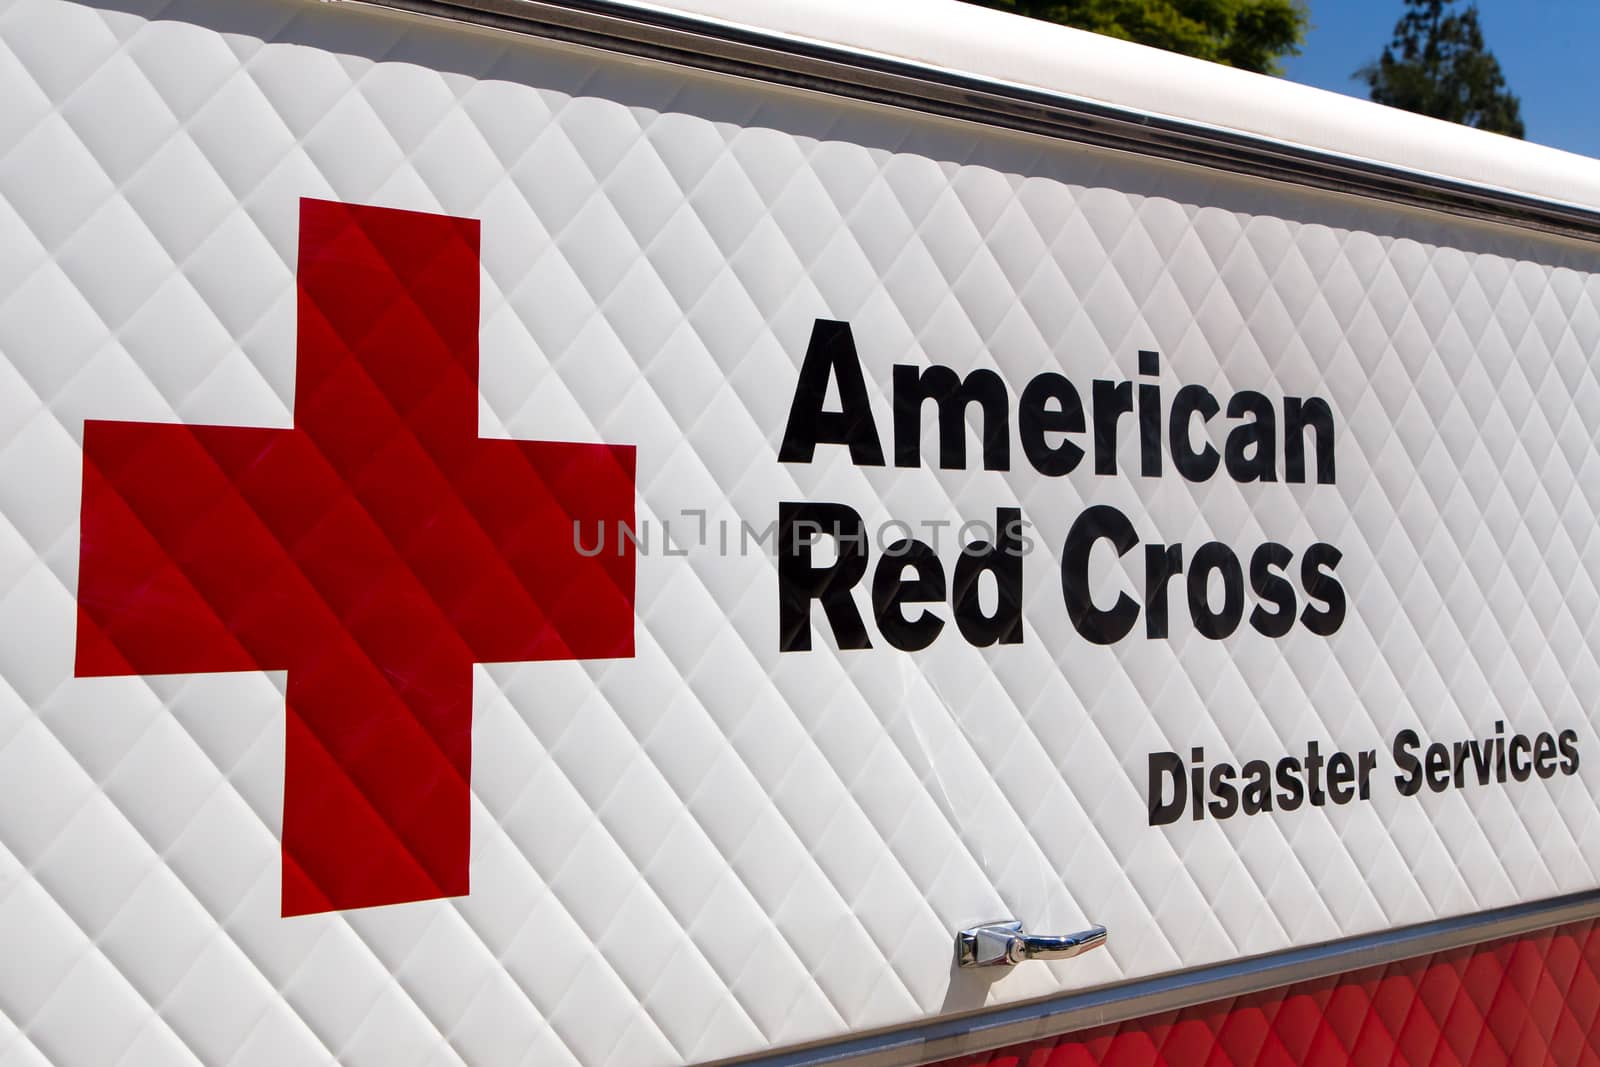 ARCADIA, CA/USA - APRIL 16, 2016: American Red Cross Disaster Services vehicle and logo. The American National Red Cross is a humanitarian organization that provides emergency assistance in the United States.